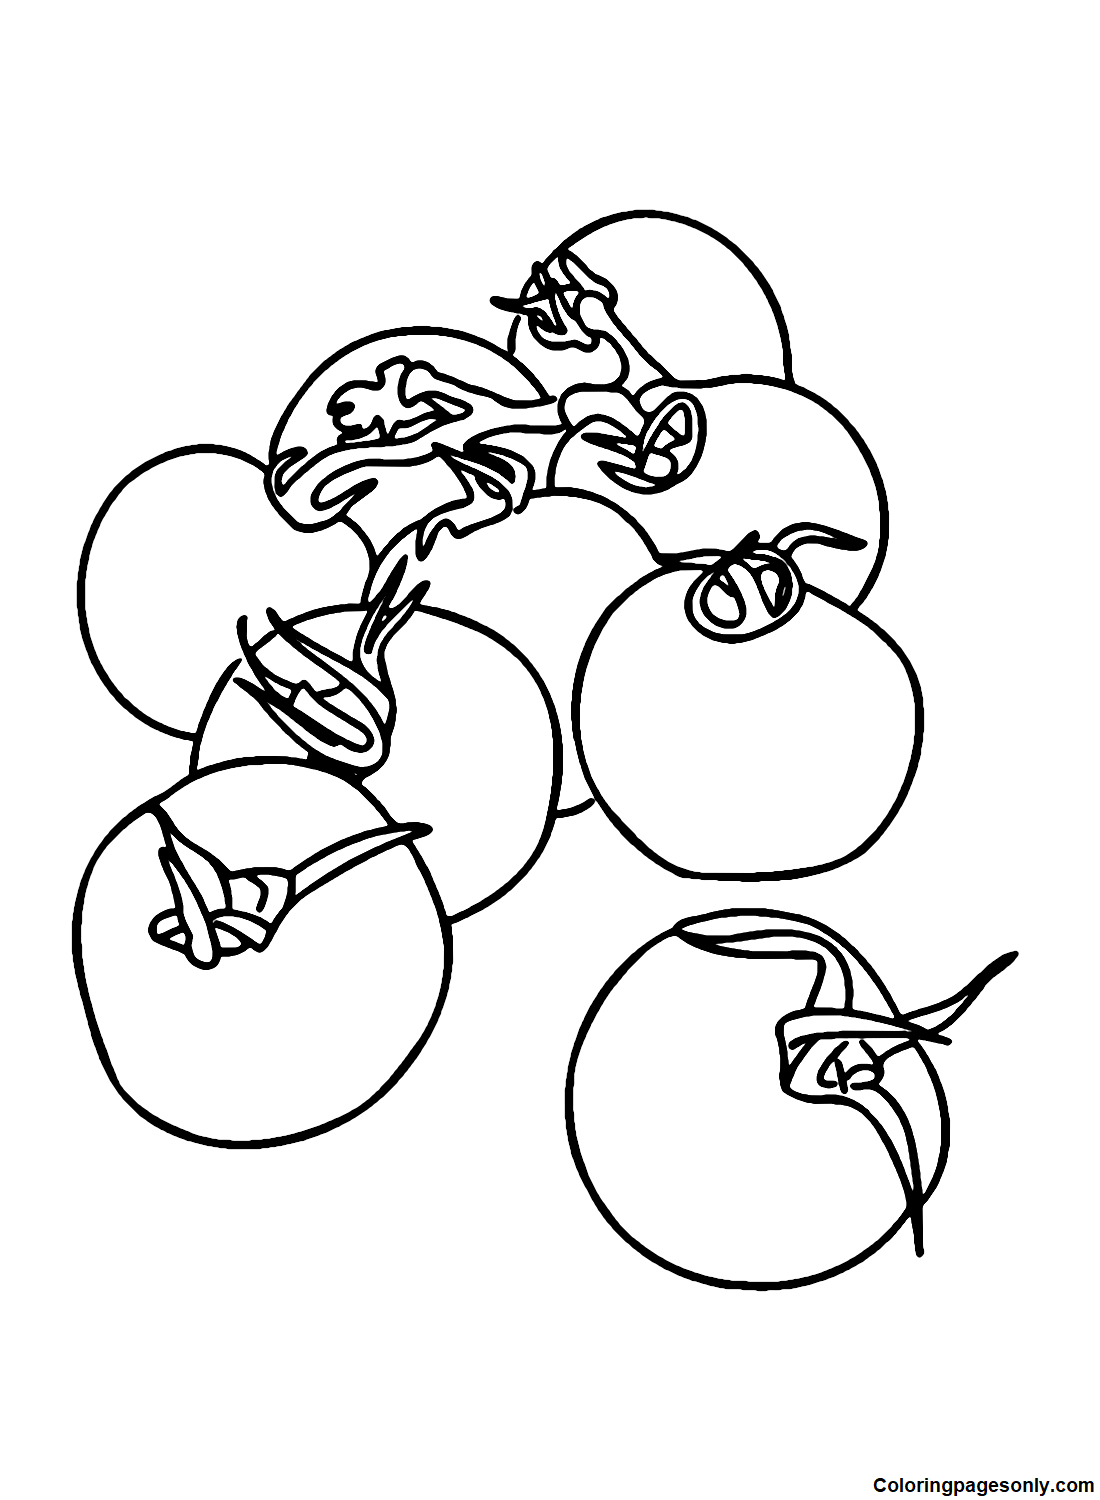 Printable Tomatoes Coloring Pages